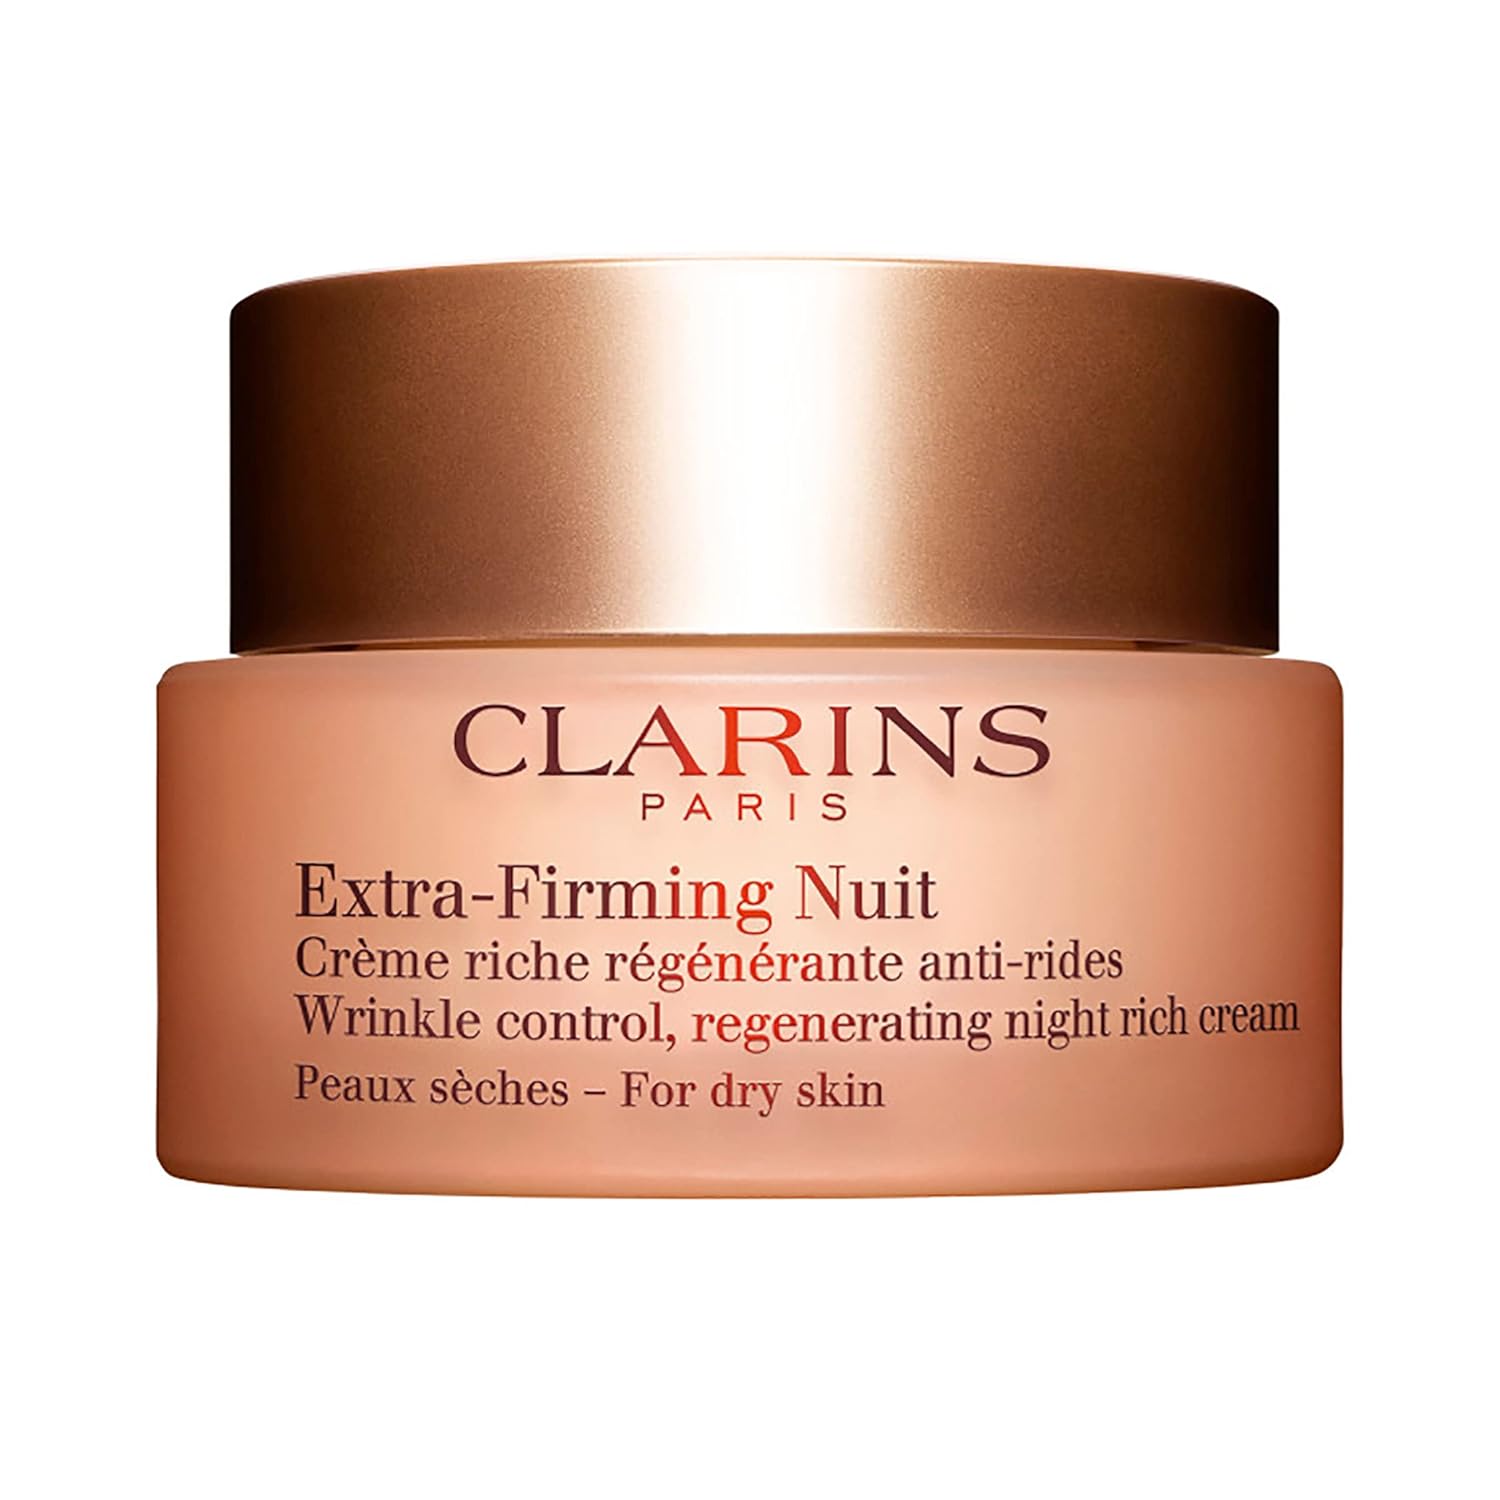 Clarins Extra-Firming Night Cream | Anti-Aging Moisturizer | In Just 2 Weeks, Skin Appears Visibly Regenerated, Firmer and Tighter* | Evens Skin Tone | Nourishes and Soothes | Dry Skin Type | 1.6